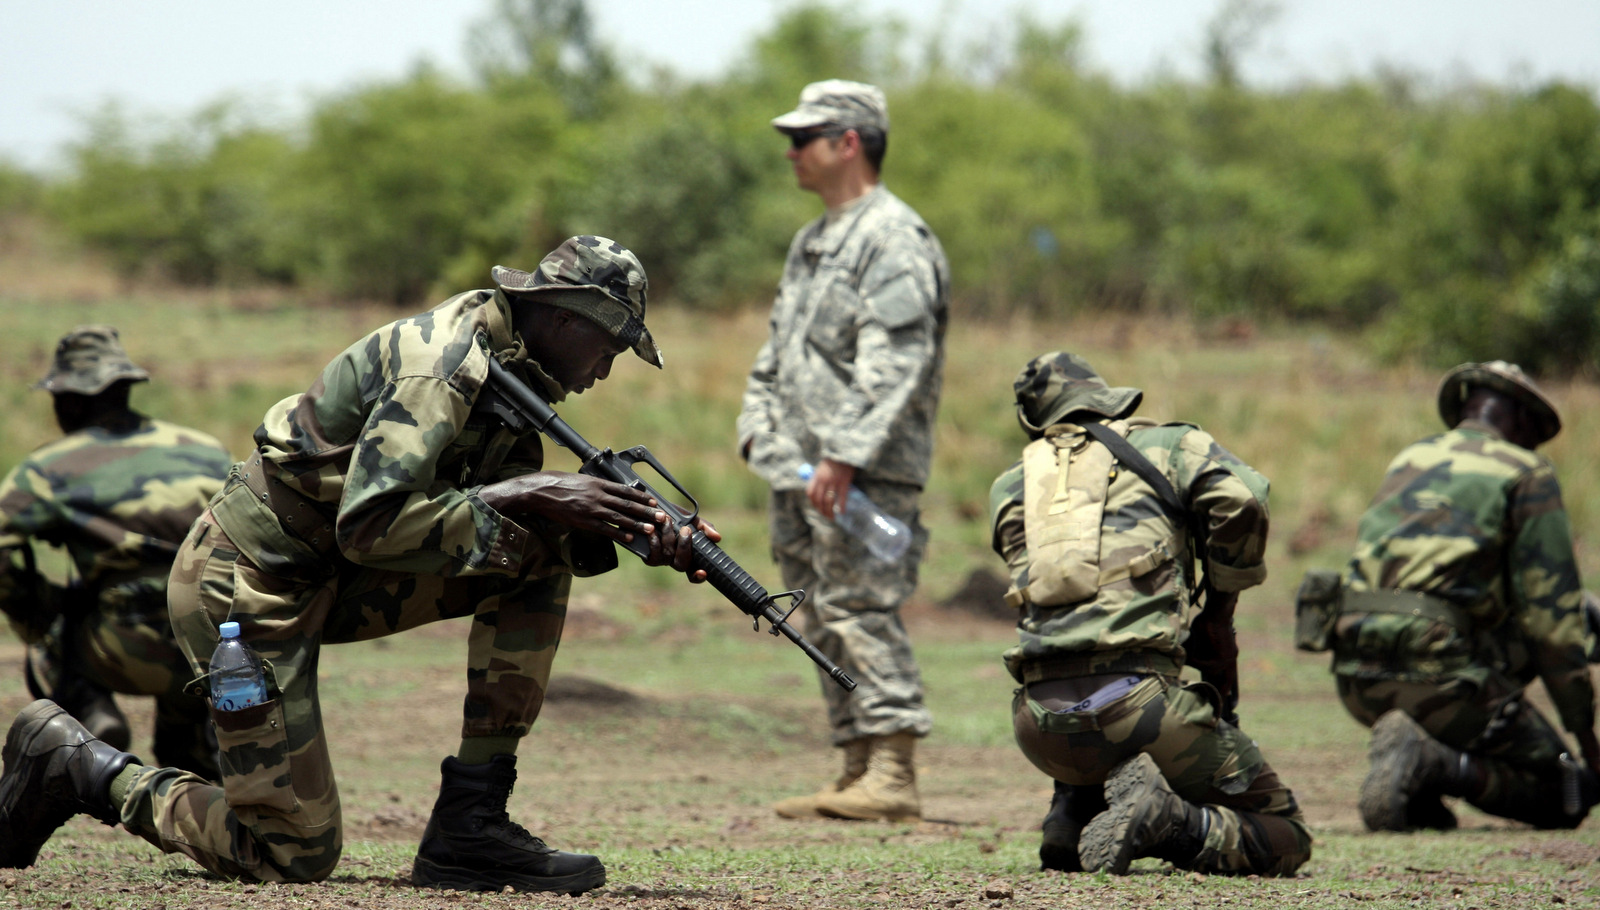 A U.S. Special Forces soldier trains troops from Senegal combat techniques in Kati, Mali, during a joint training exercise with units from several African armies. (AP/Alfred de Montesquiou)